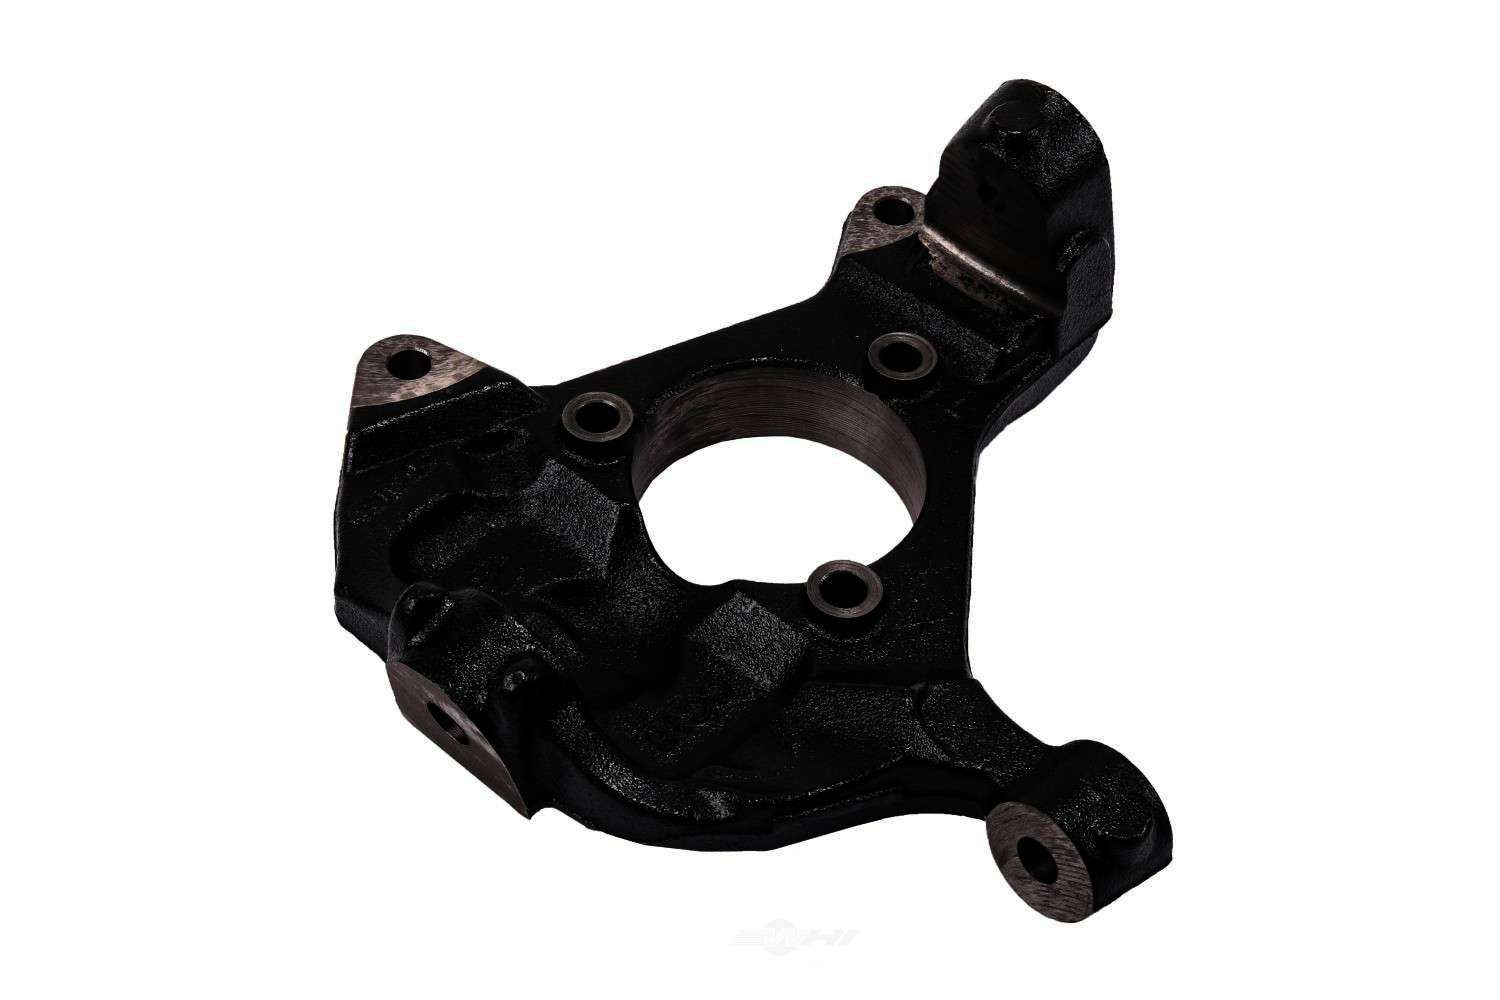 GM GENUINE PARTS - Steering Knuckle - GMP 22760659